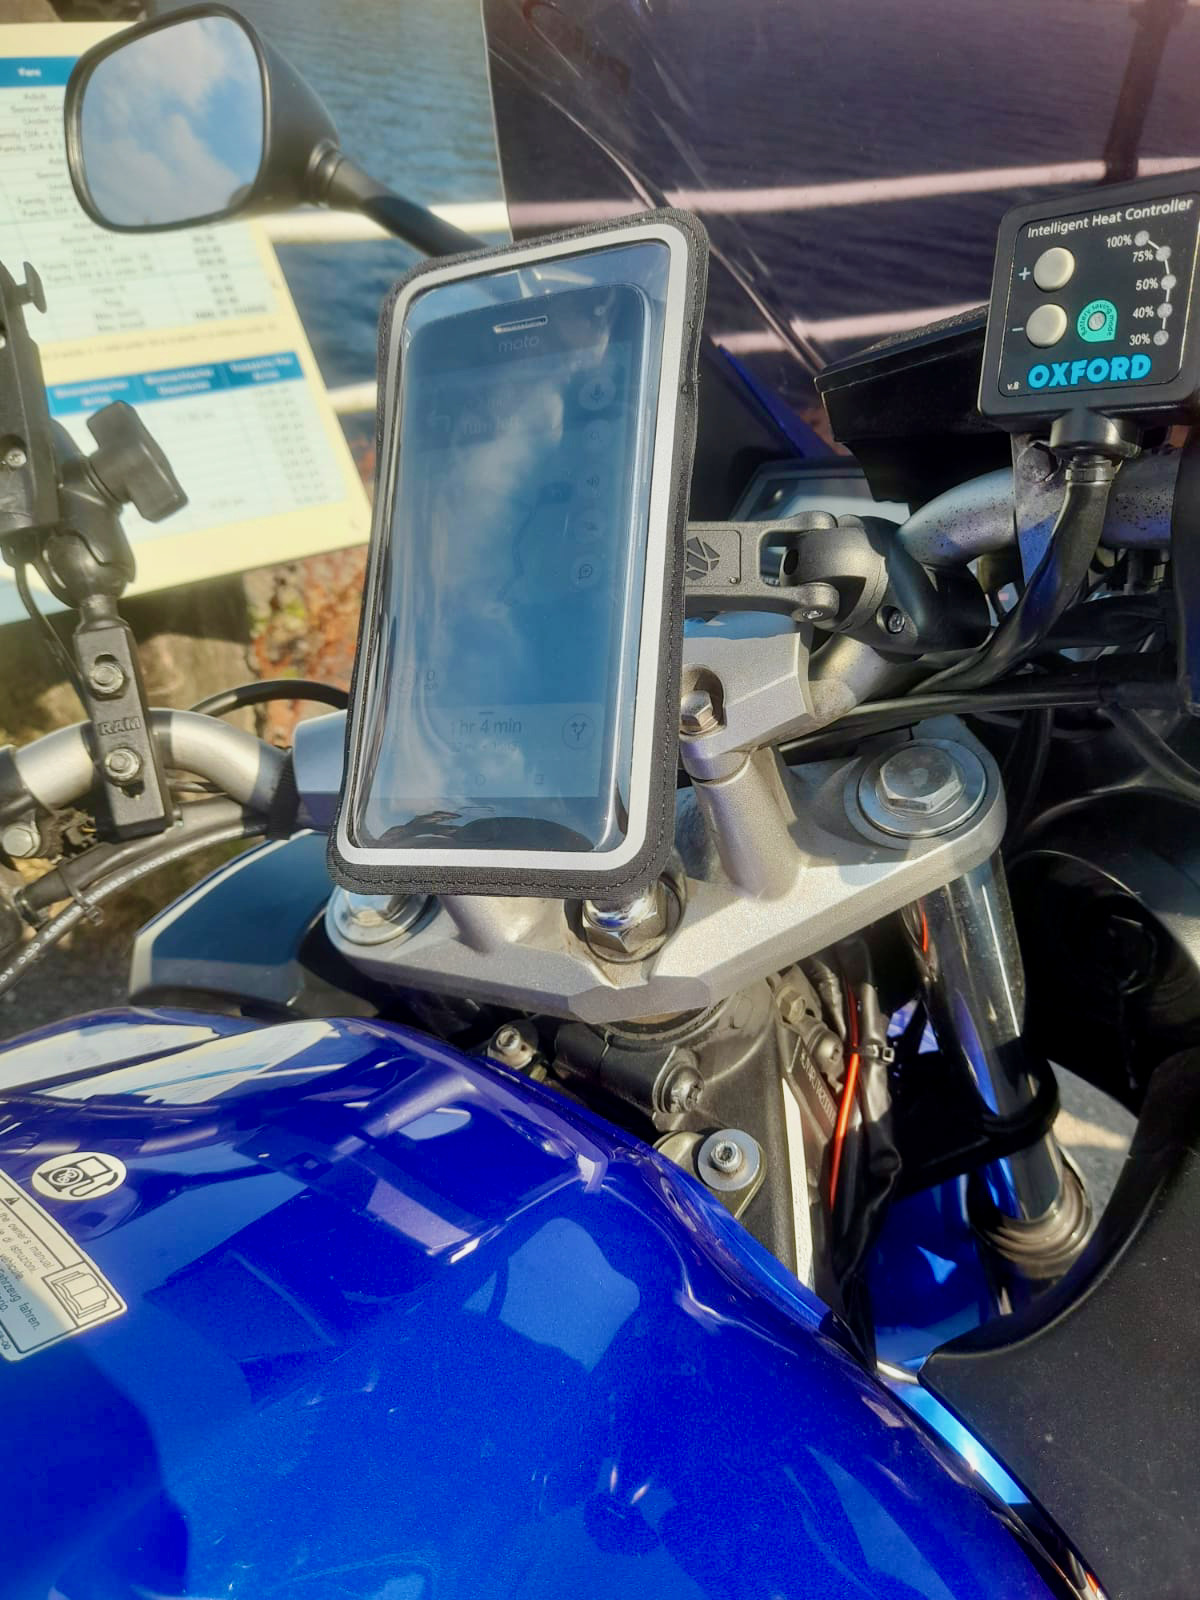 Review: Shapeheart Classic Handlebar Phone Mounting System